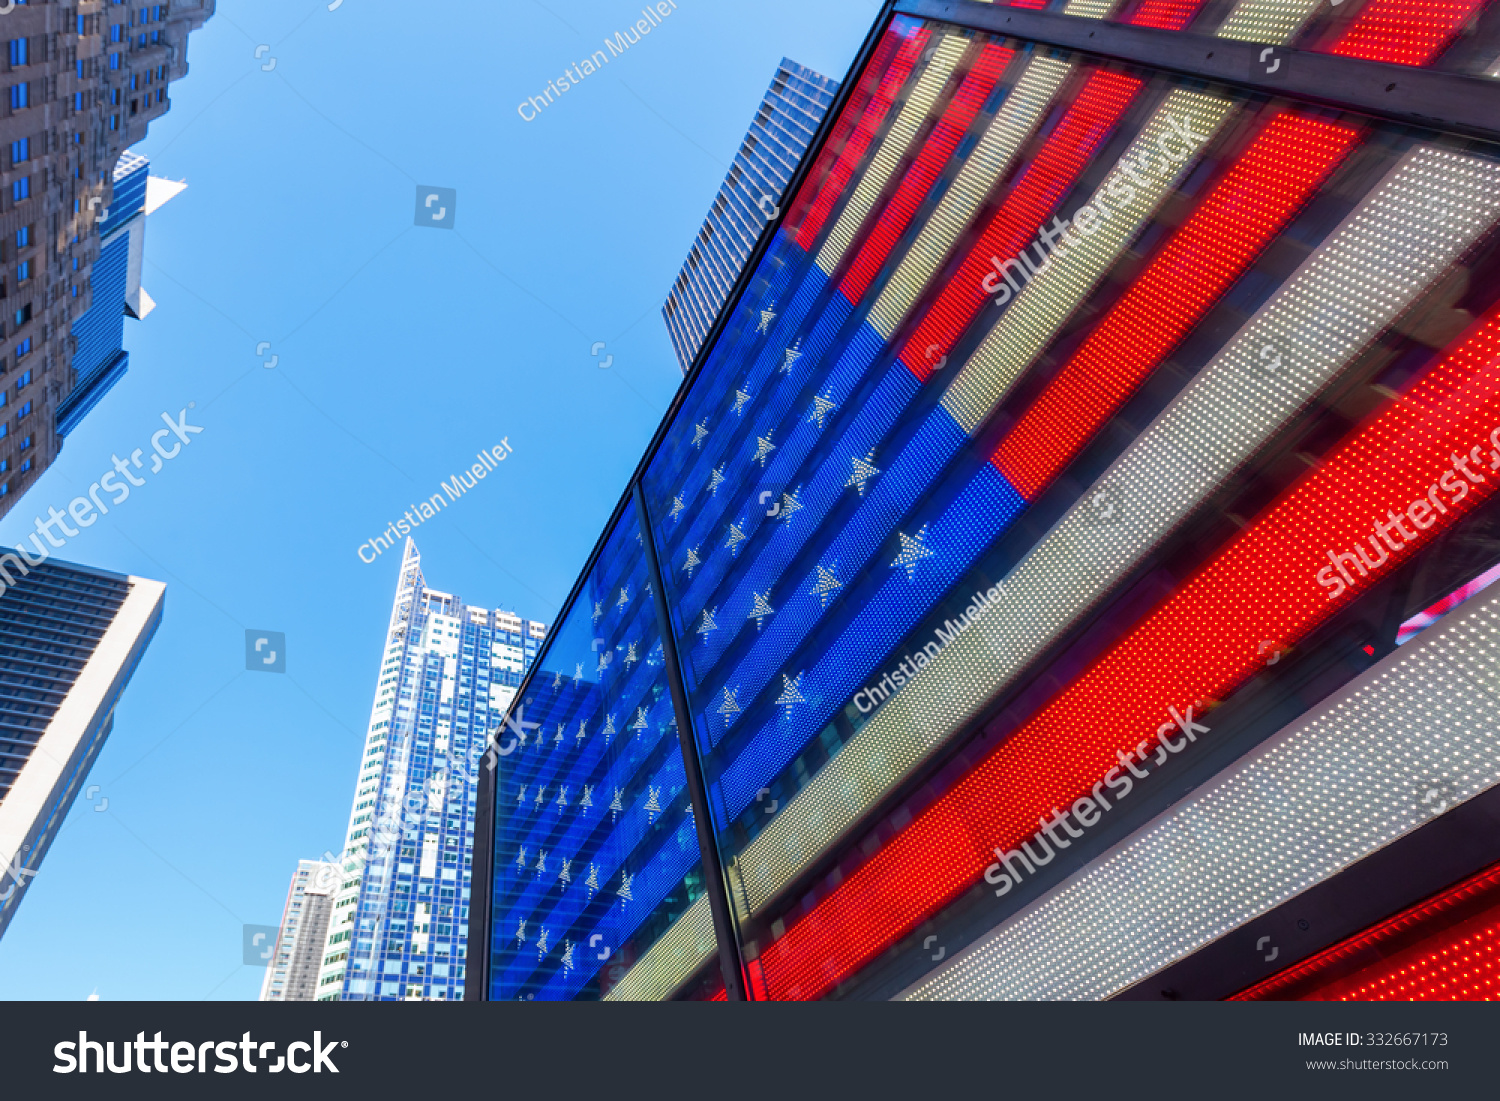 NEW YORK CITY - OCTOBER 10, 2015: neon US flag at Times Square. Times Square is one of the worlds busiest pedestrian intersections and a major center of worlds entertainment industry #332667173